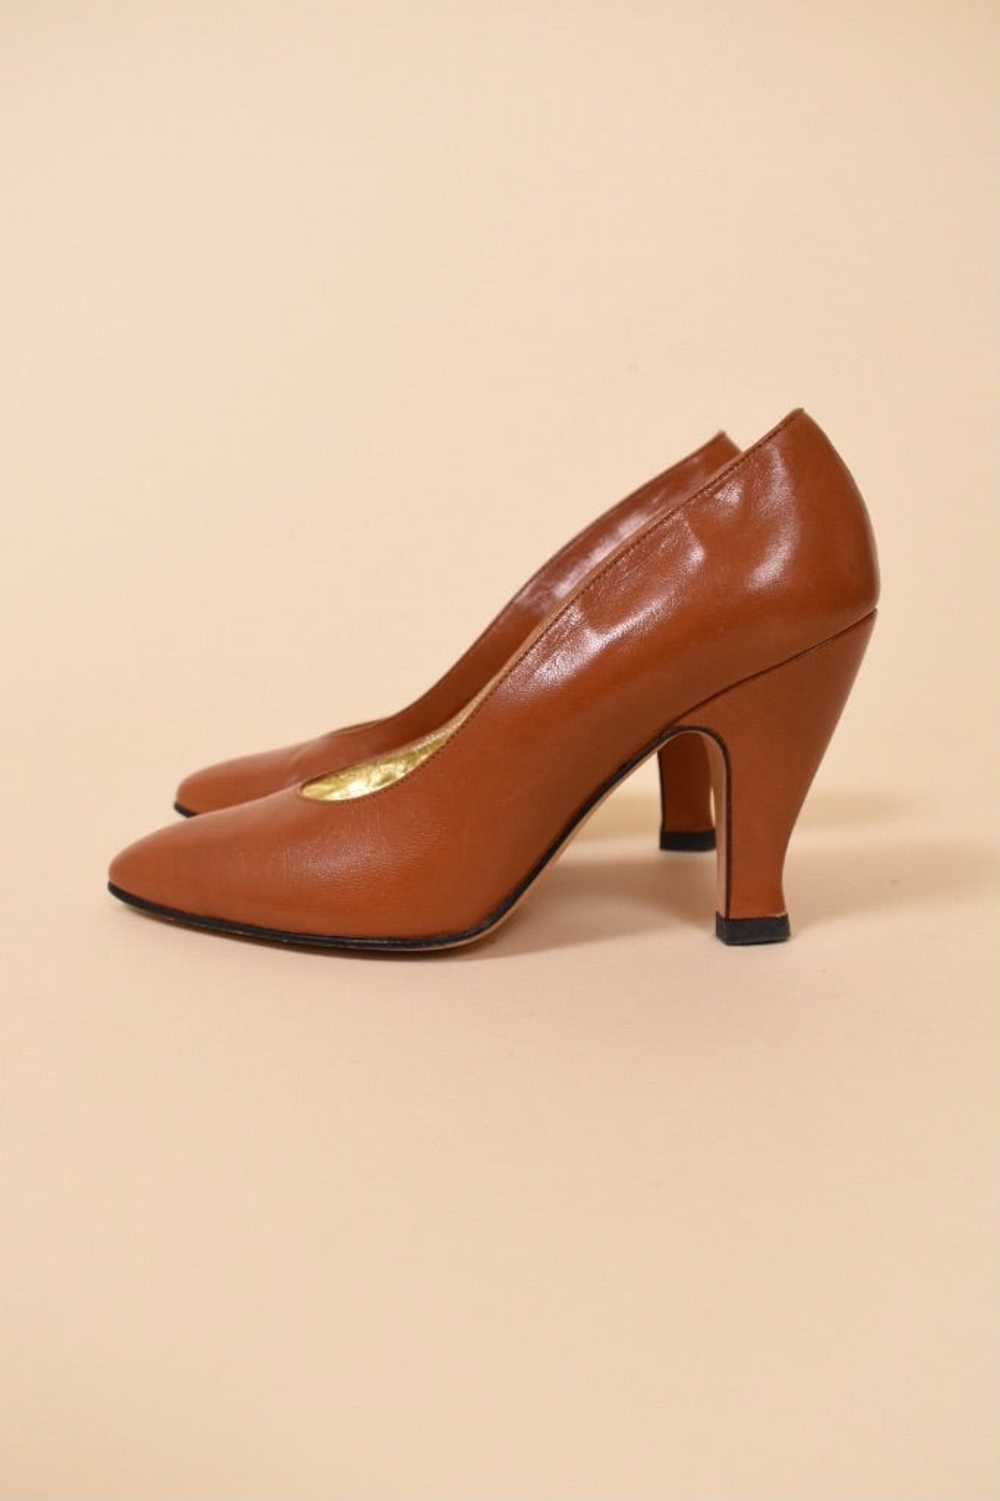 Brown Leather Pumps By Escada, 5 - image 3